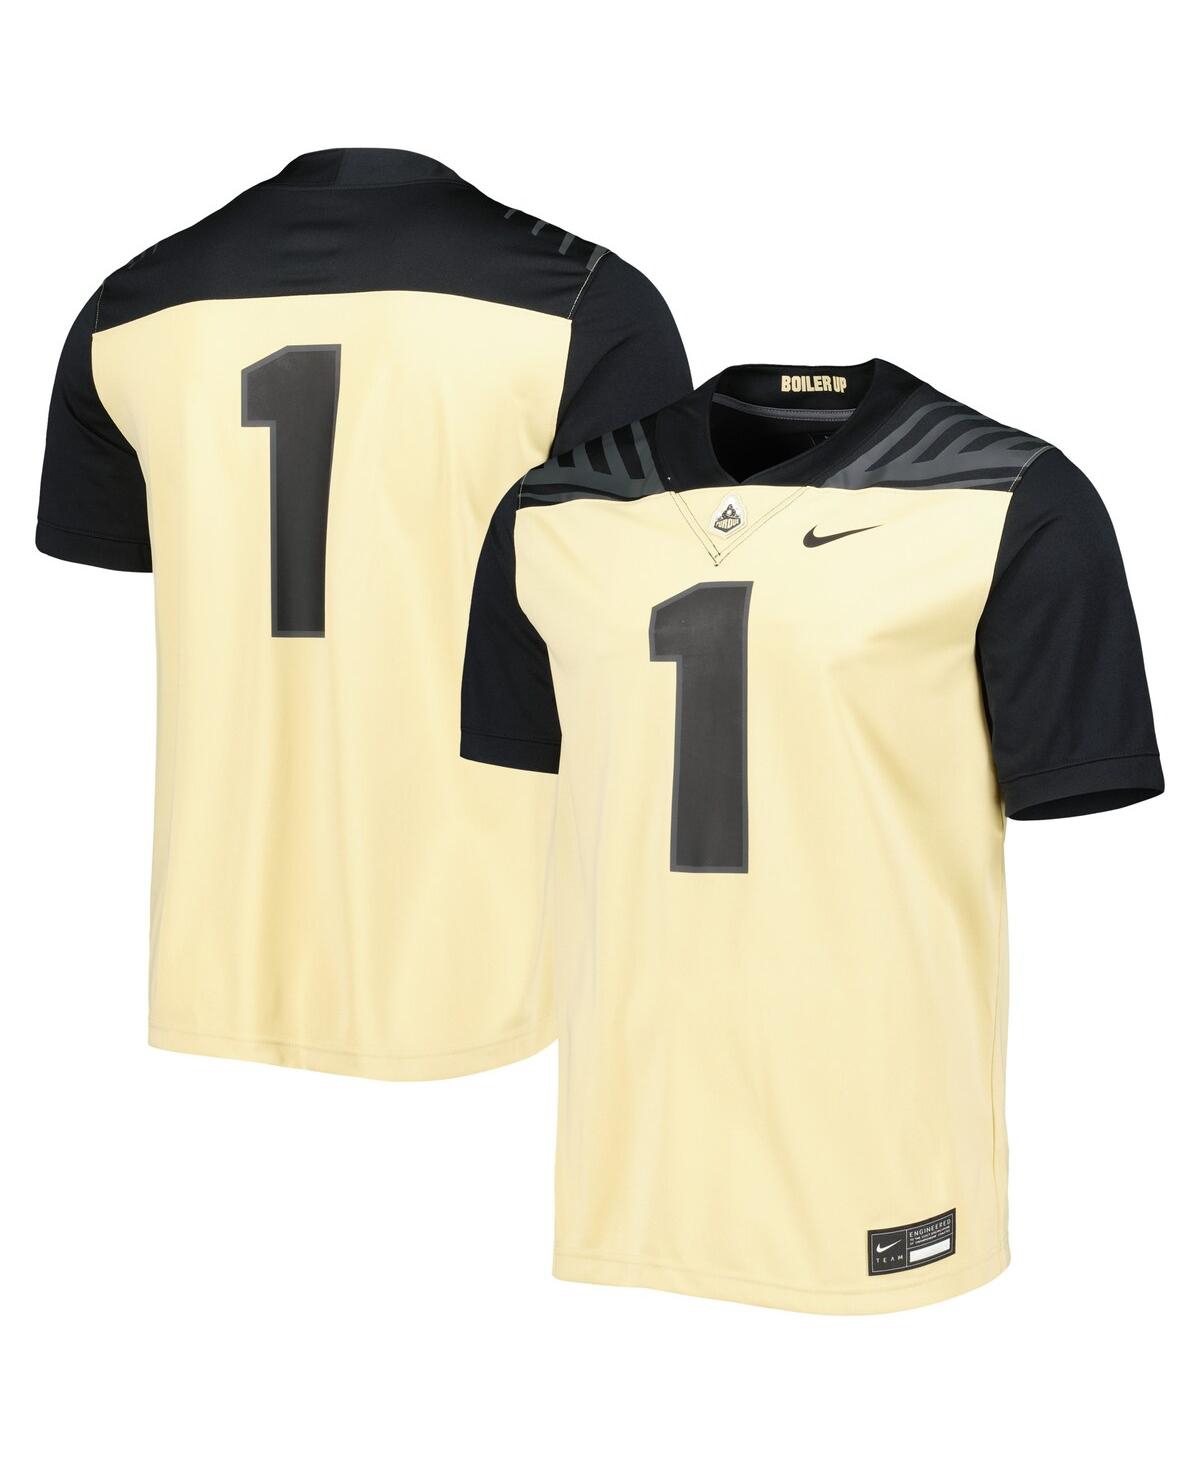 Men's Nike #1 Gold Purdue Boilermakers Untouchable Football Jersey - Gold